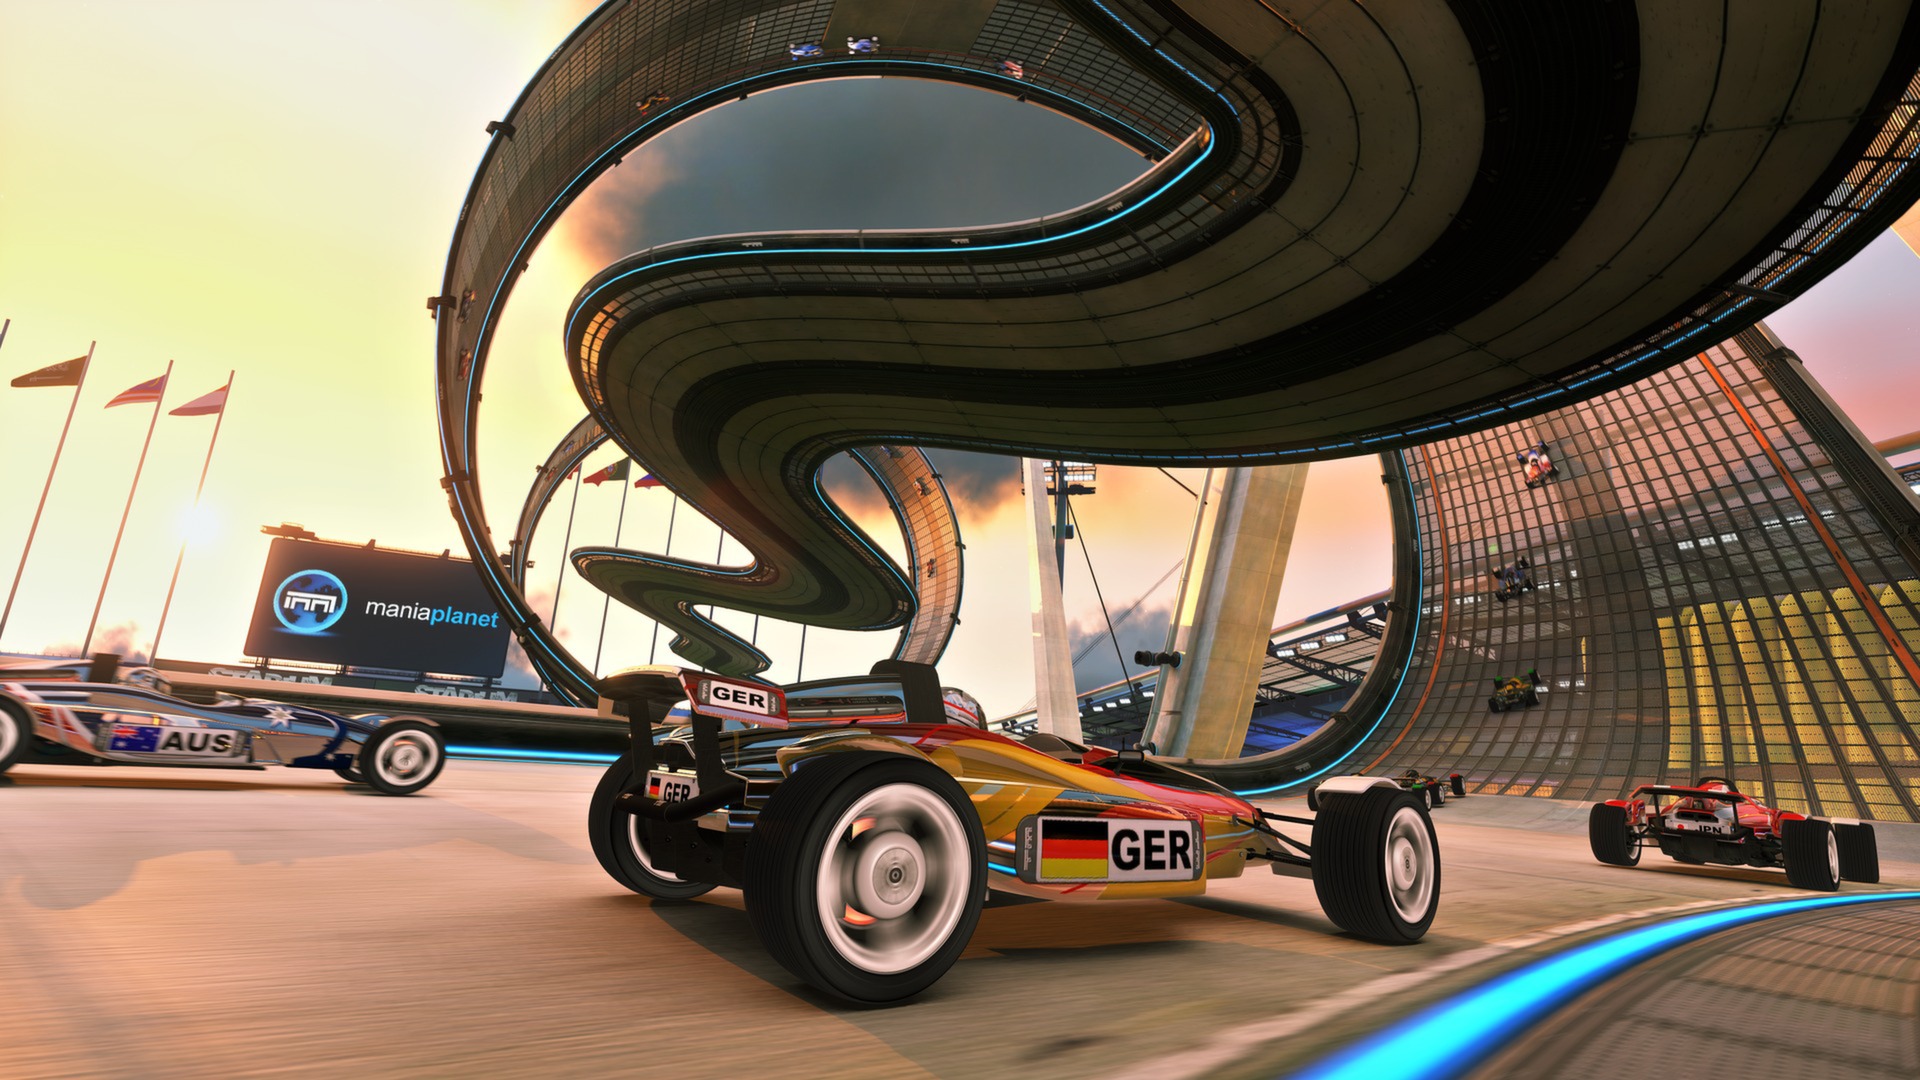 trackmania 2 valley pc download